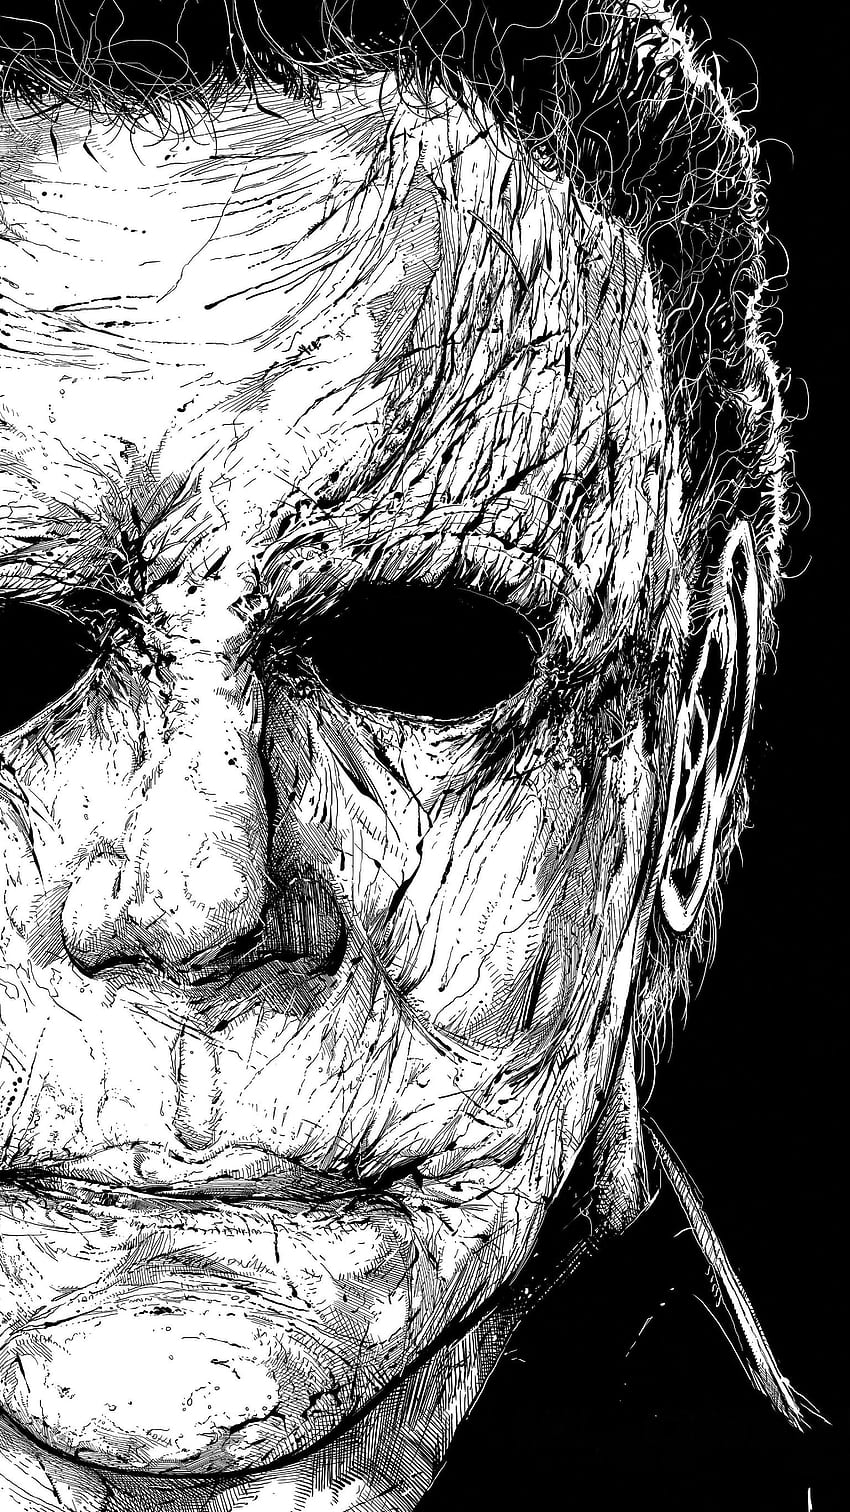 Michael Myers Wallpapers  Top 35 Best Michael Myers Wallpapers Download